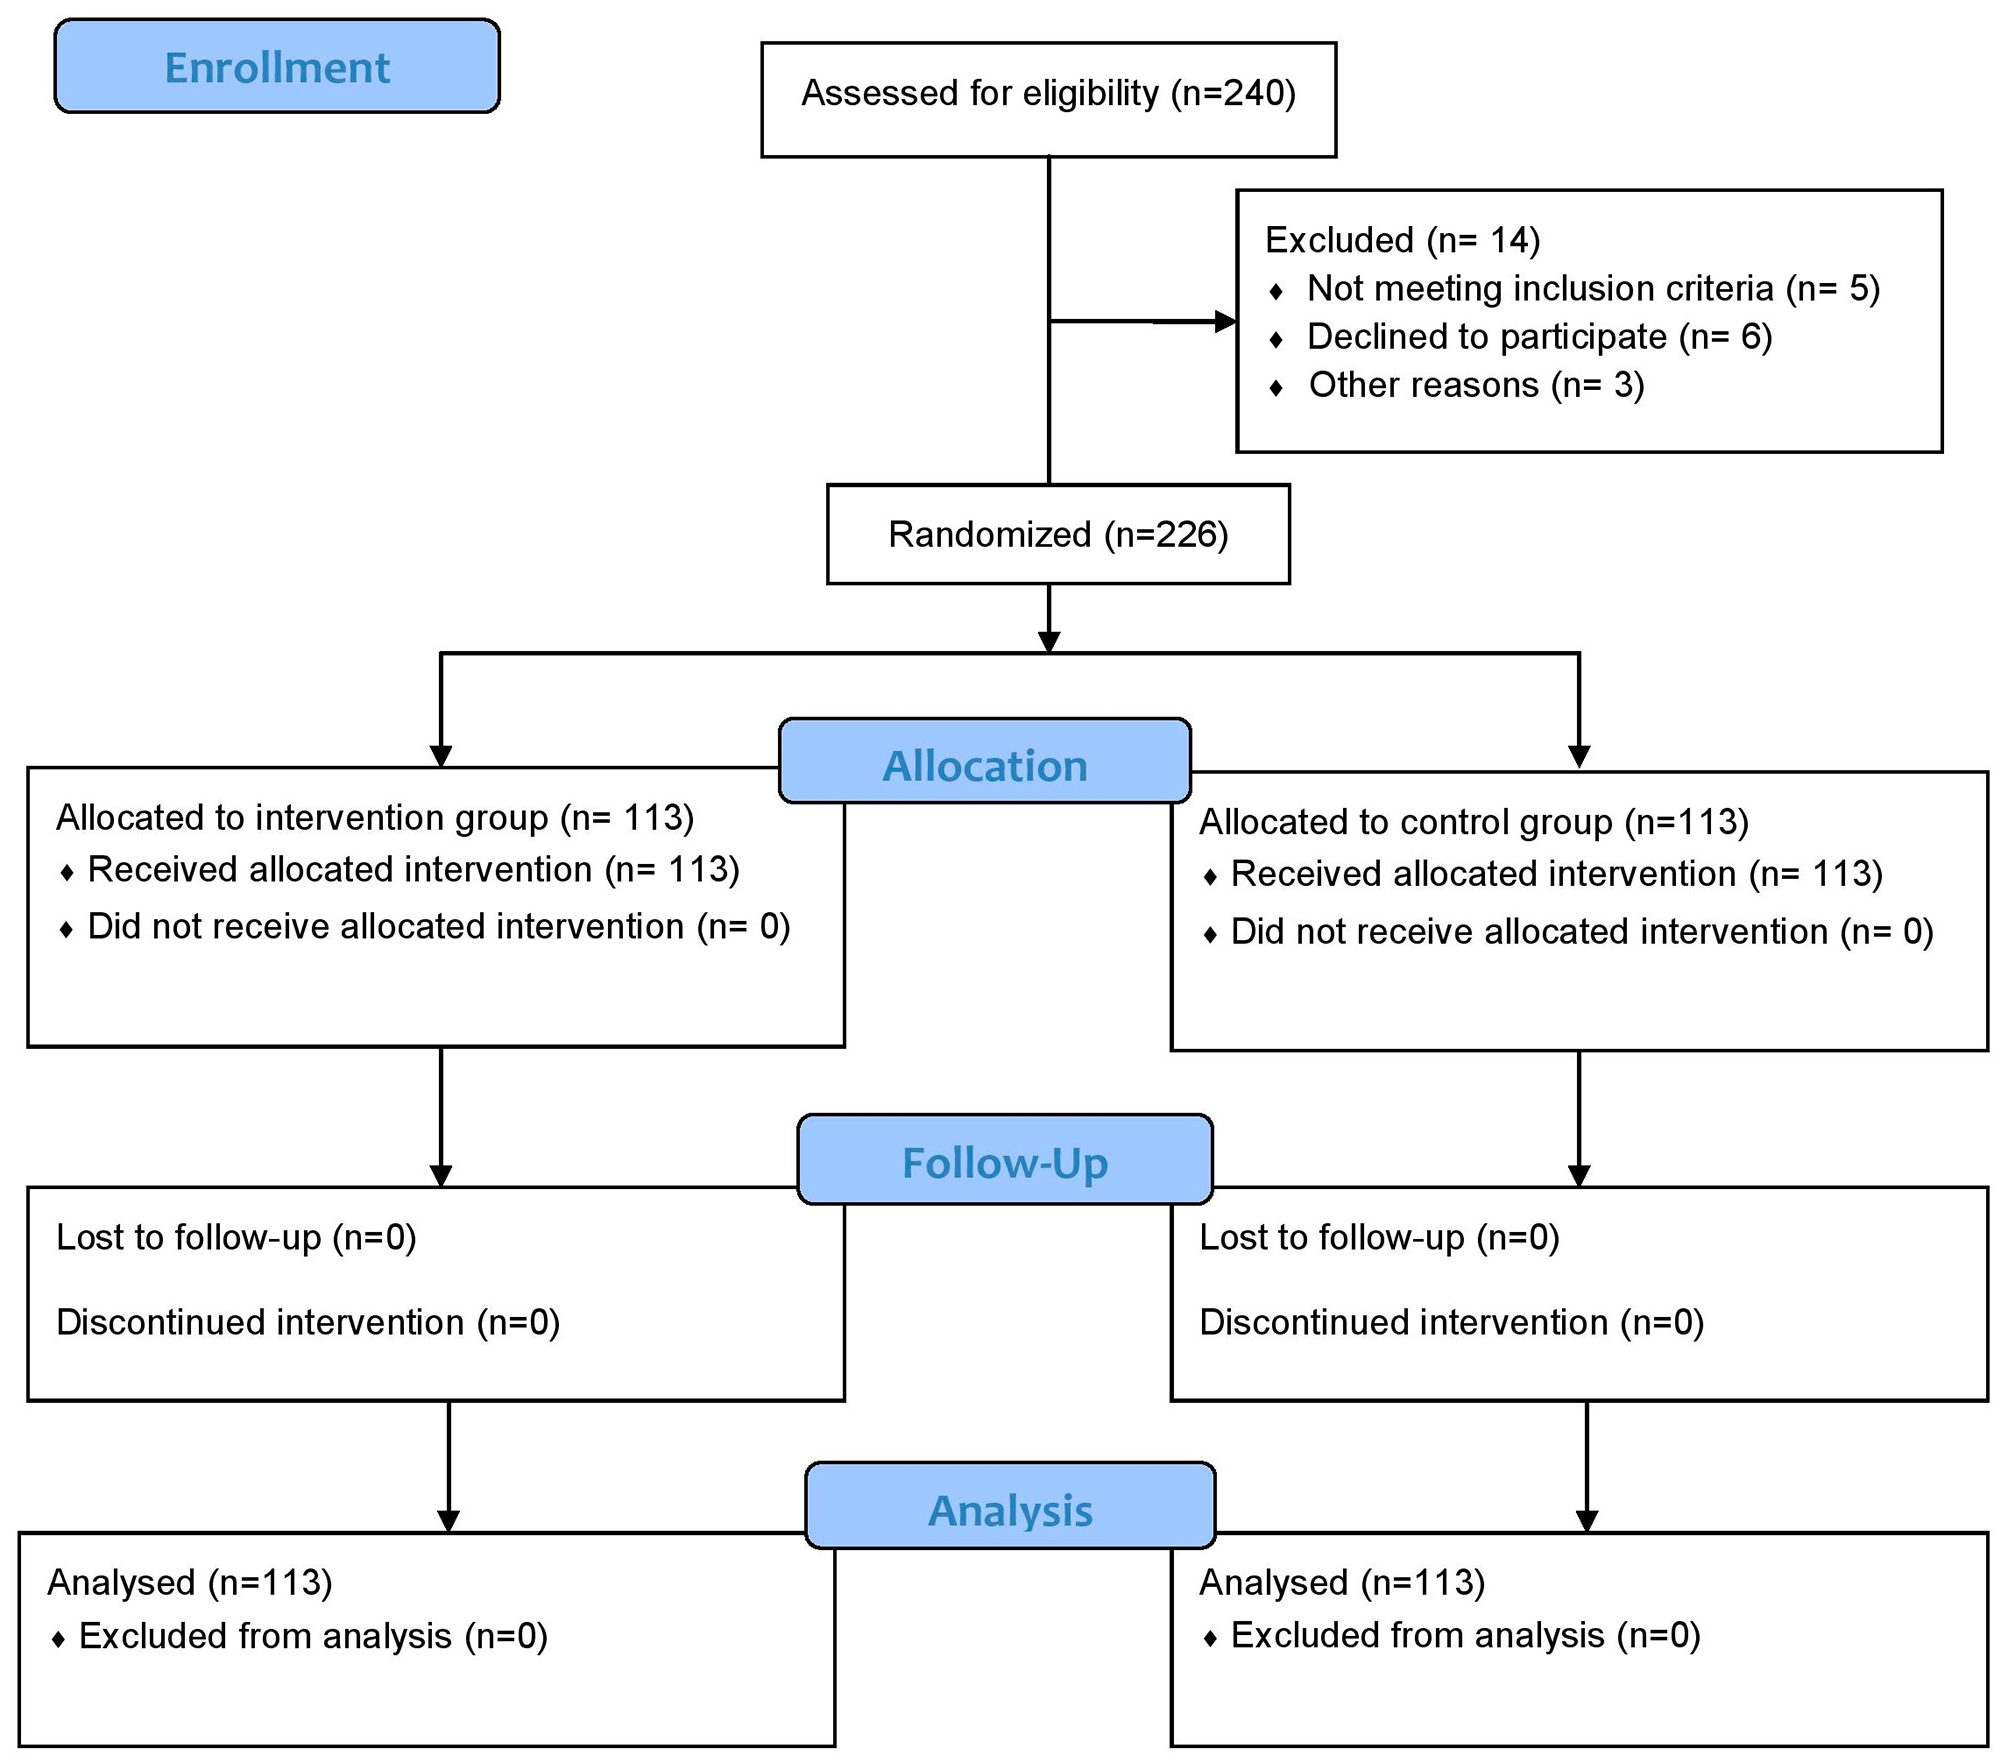 Effect of nutrition education intervention on nutrition knowledge, attitude, and diet quality among school-going adolescents: a quasi-experimental study